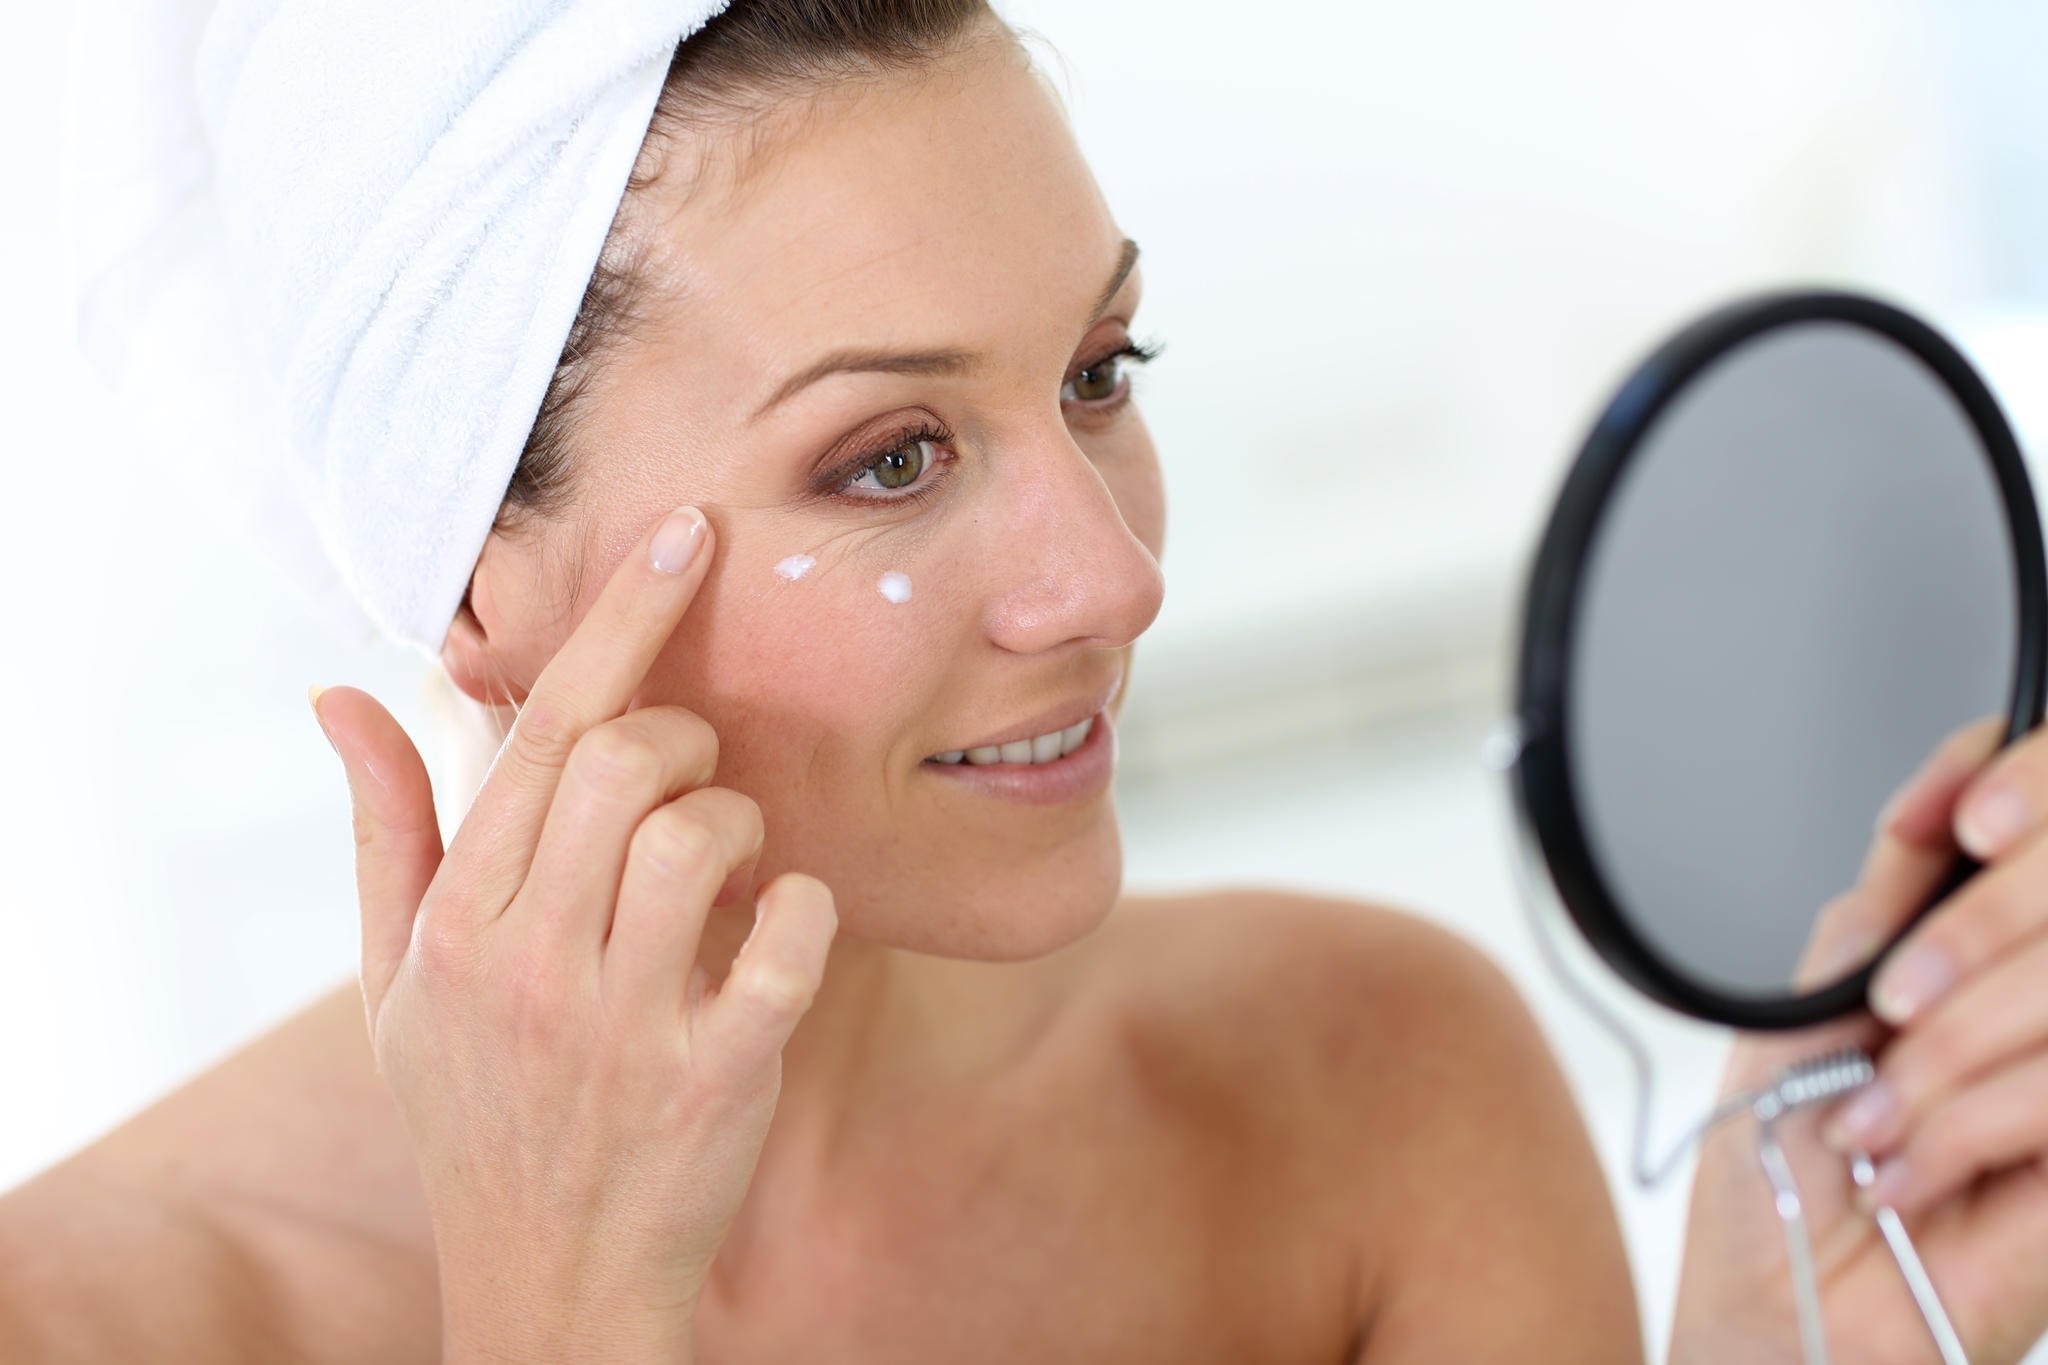 Facial Skincare Products for More Youthful-Looking Skin